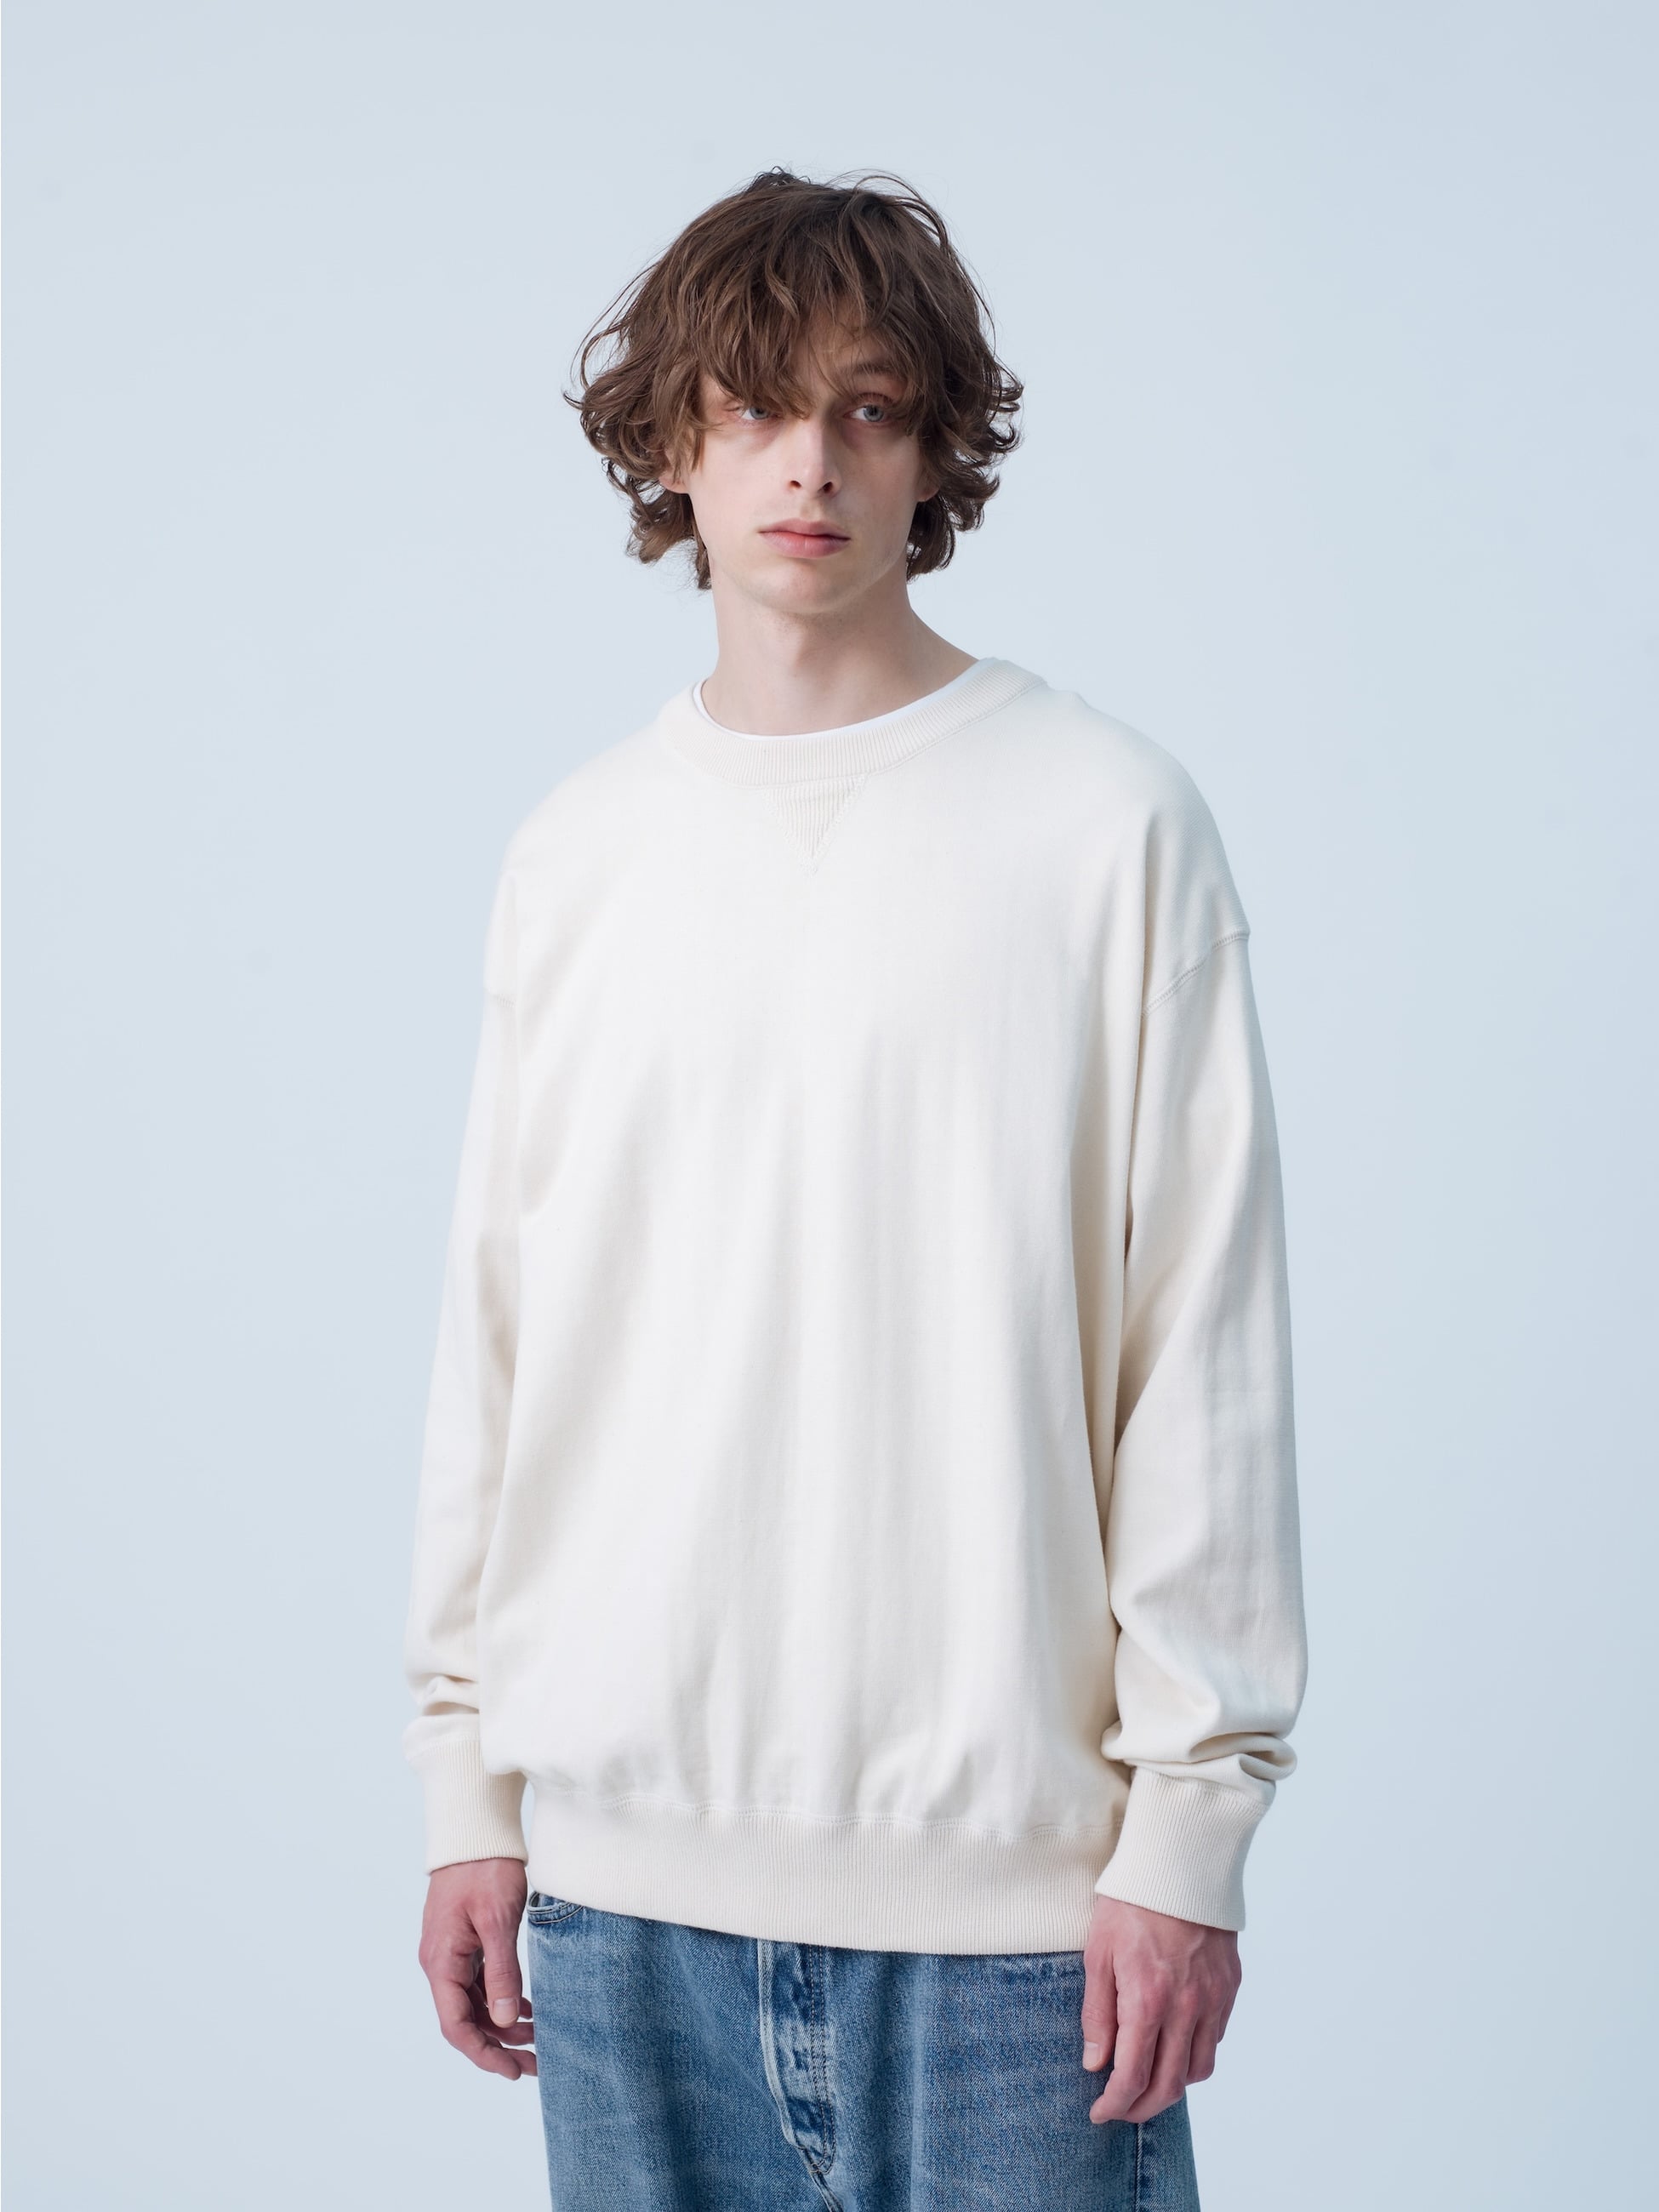 Jacques Knit Pullover｜DEMY BY DEMYLEE(デミー バイ デミリー)｜Ron